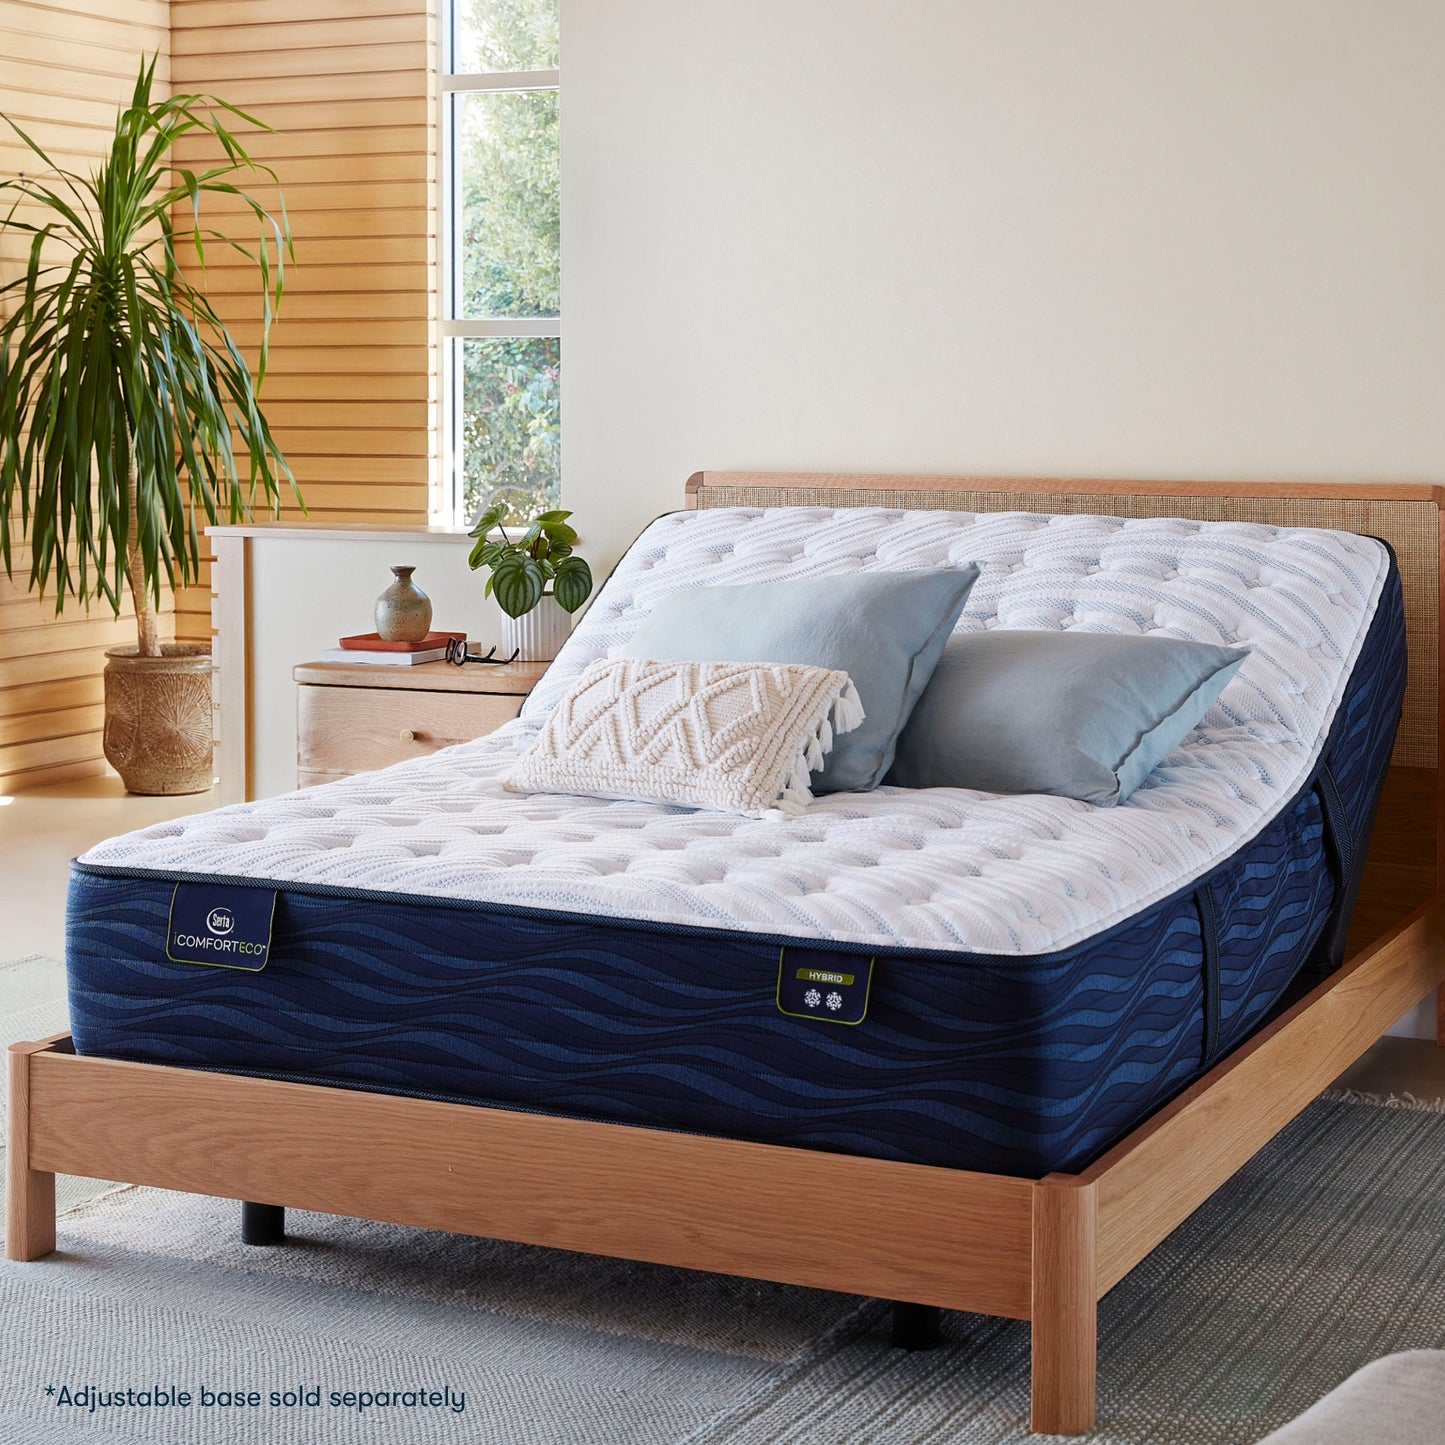 Serta iComfortECO Quilted Hybrid Extra Firm Mattress In Bedroom